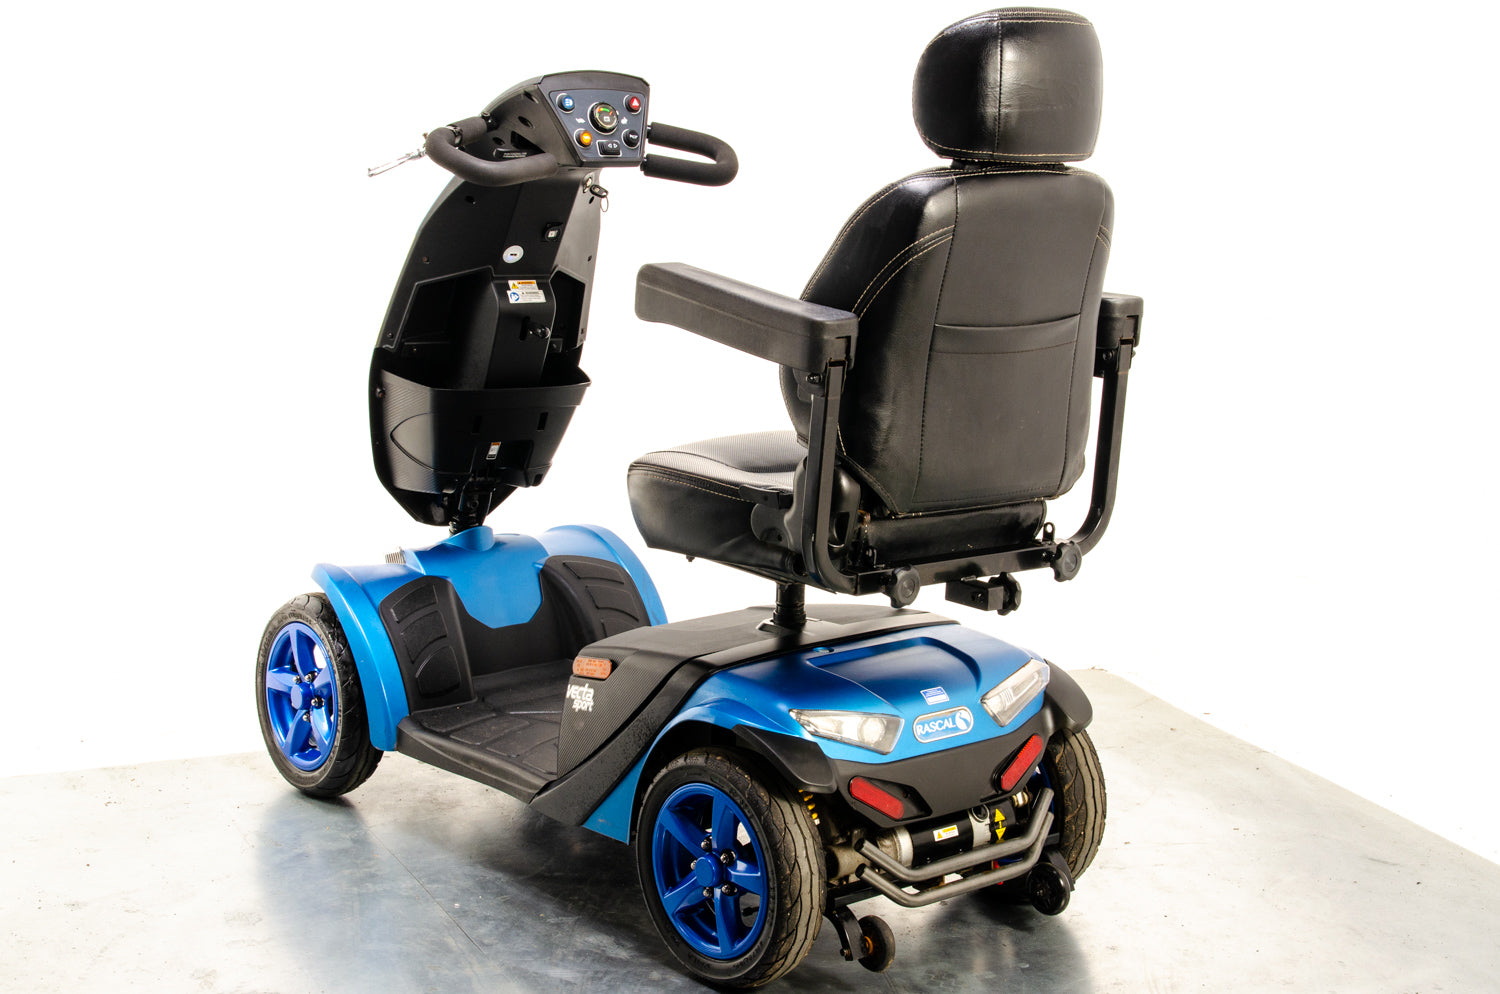 Rascal Vecta Sport Compact Used Electric Mobility Scooter 8mph Max Grip Suspension All-Terrain Road Legal Blue 13318